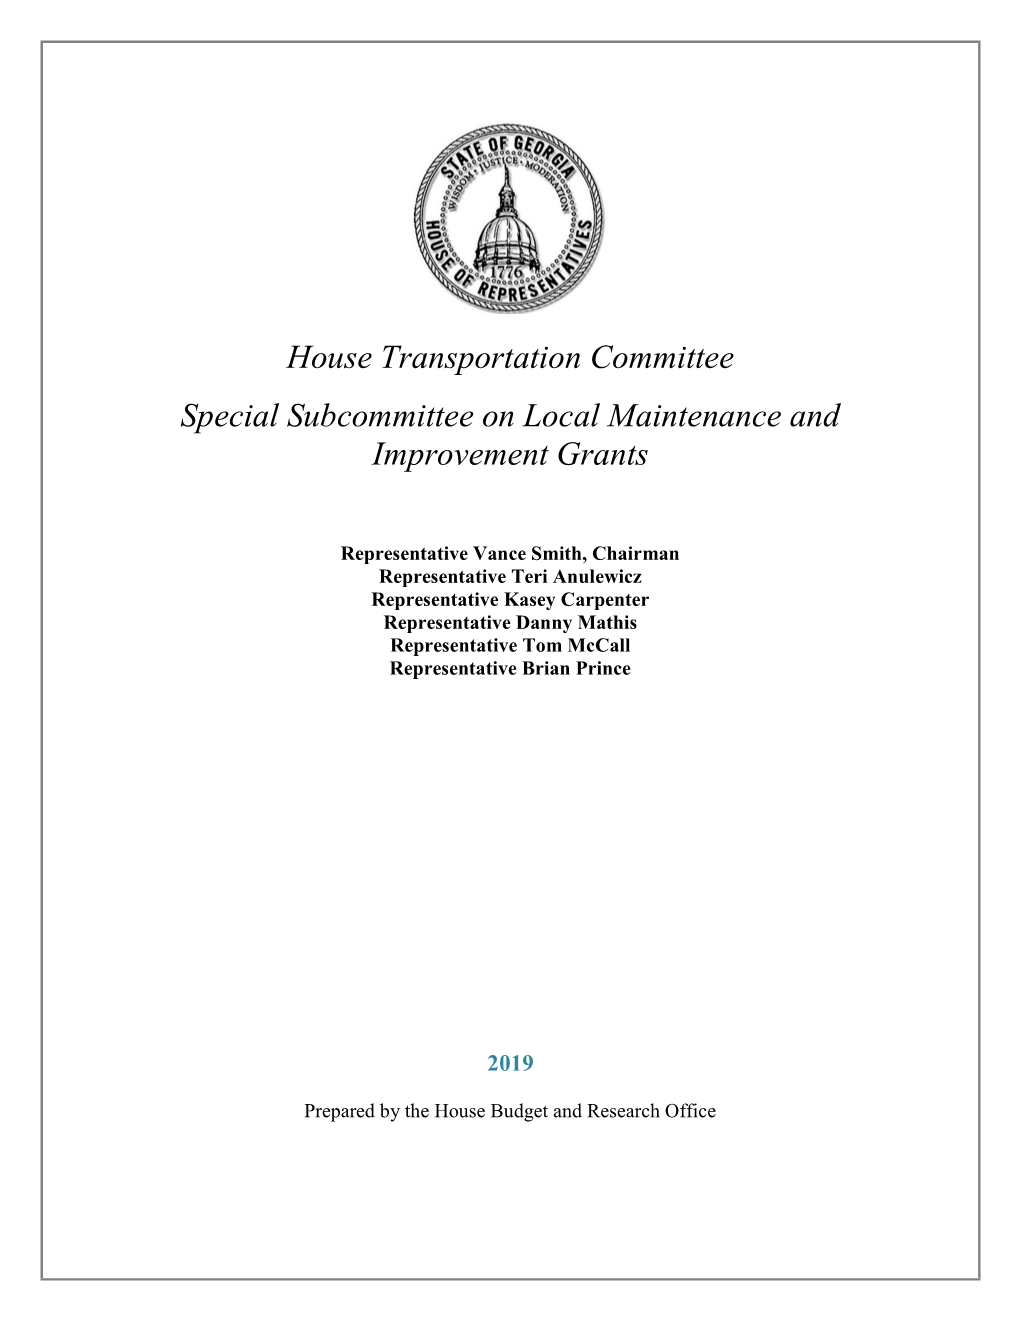 House Transportation Committee Special Subcommittee on Local Maintenance and Improvement Grants